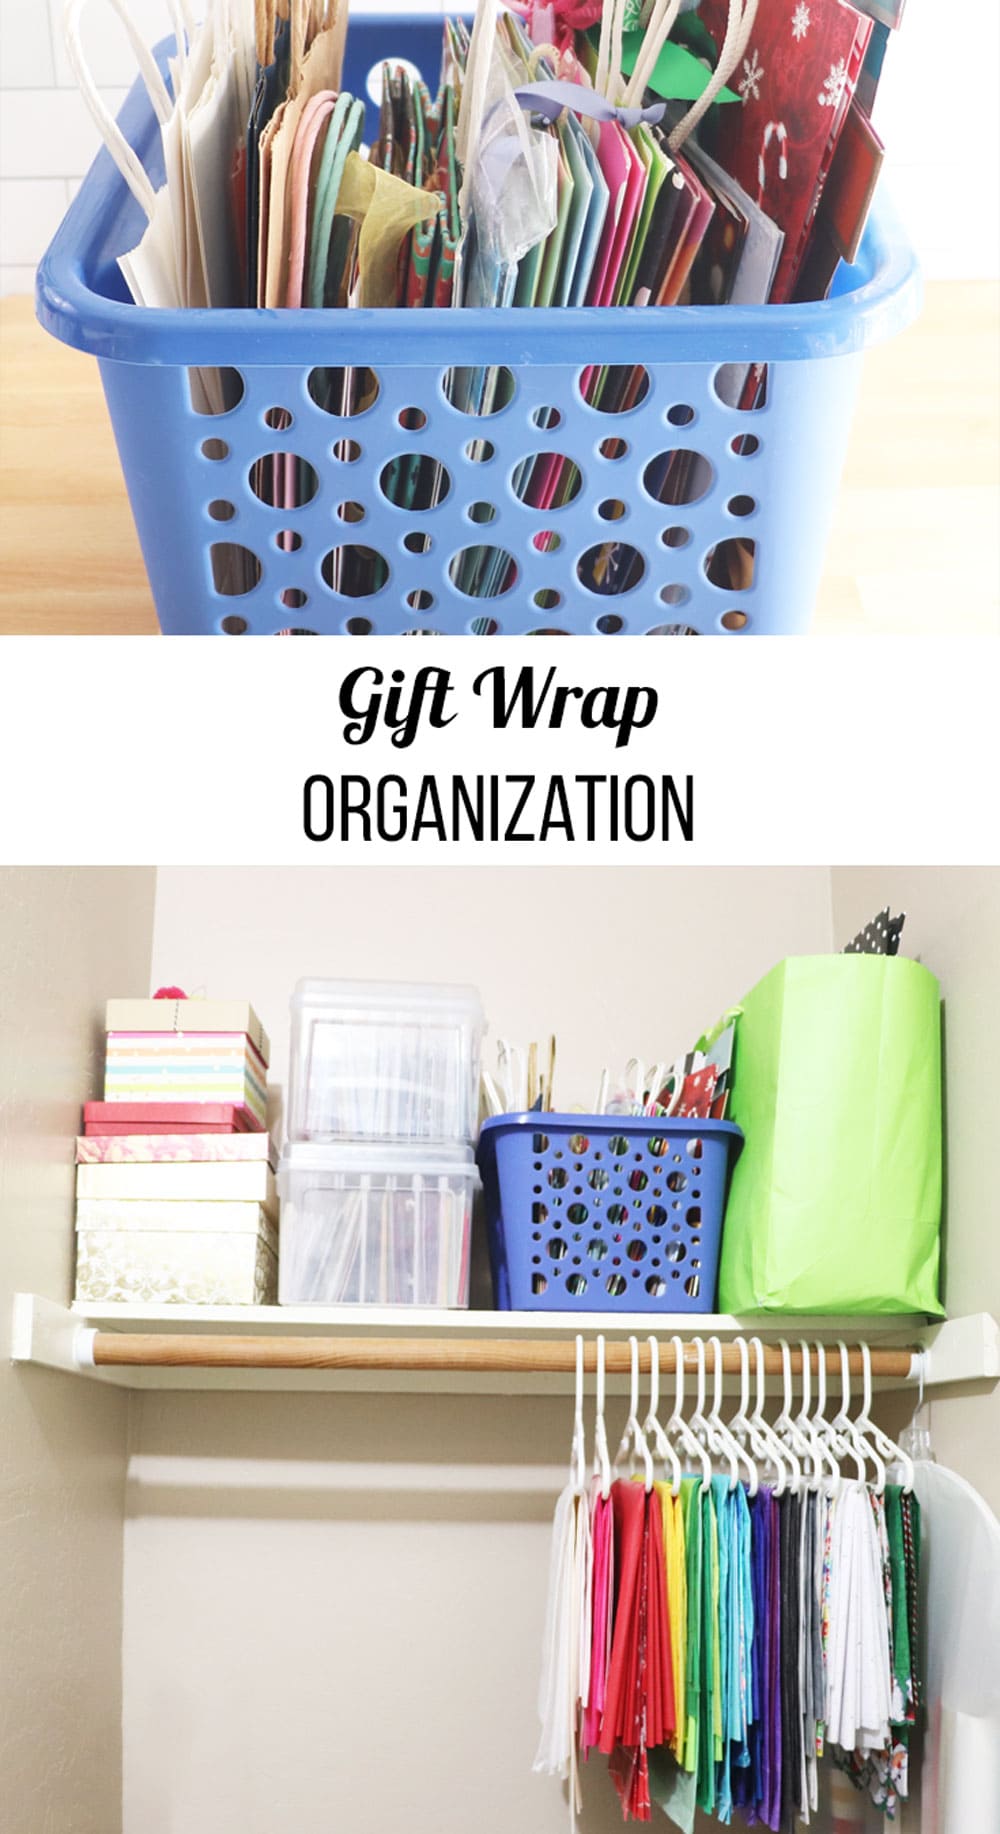 10 Tips for Organizing Wrapping Paper and Gift Bags​